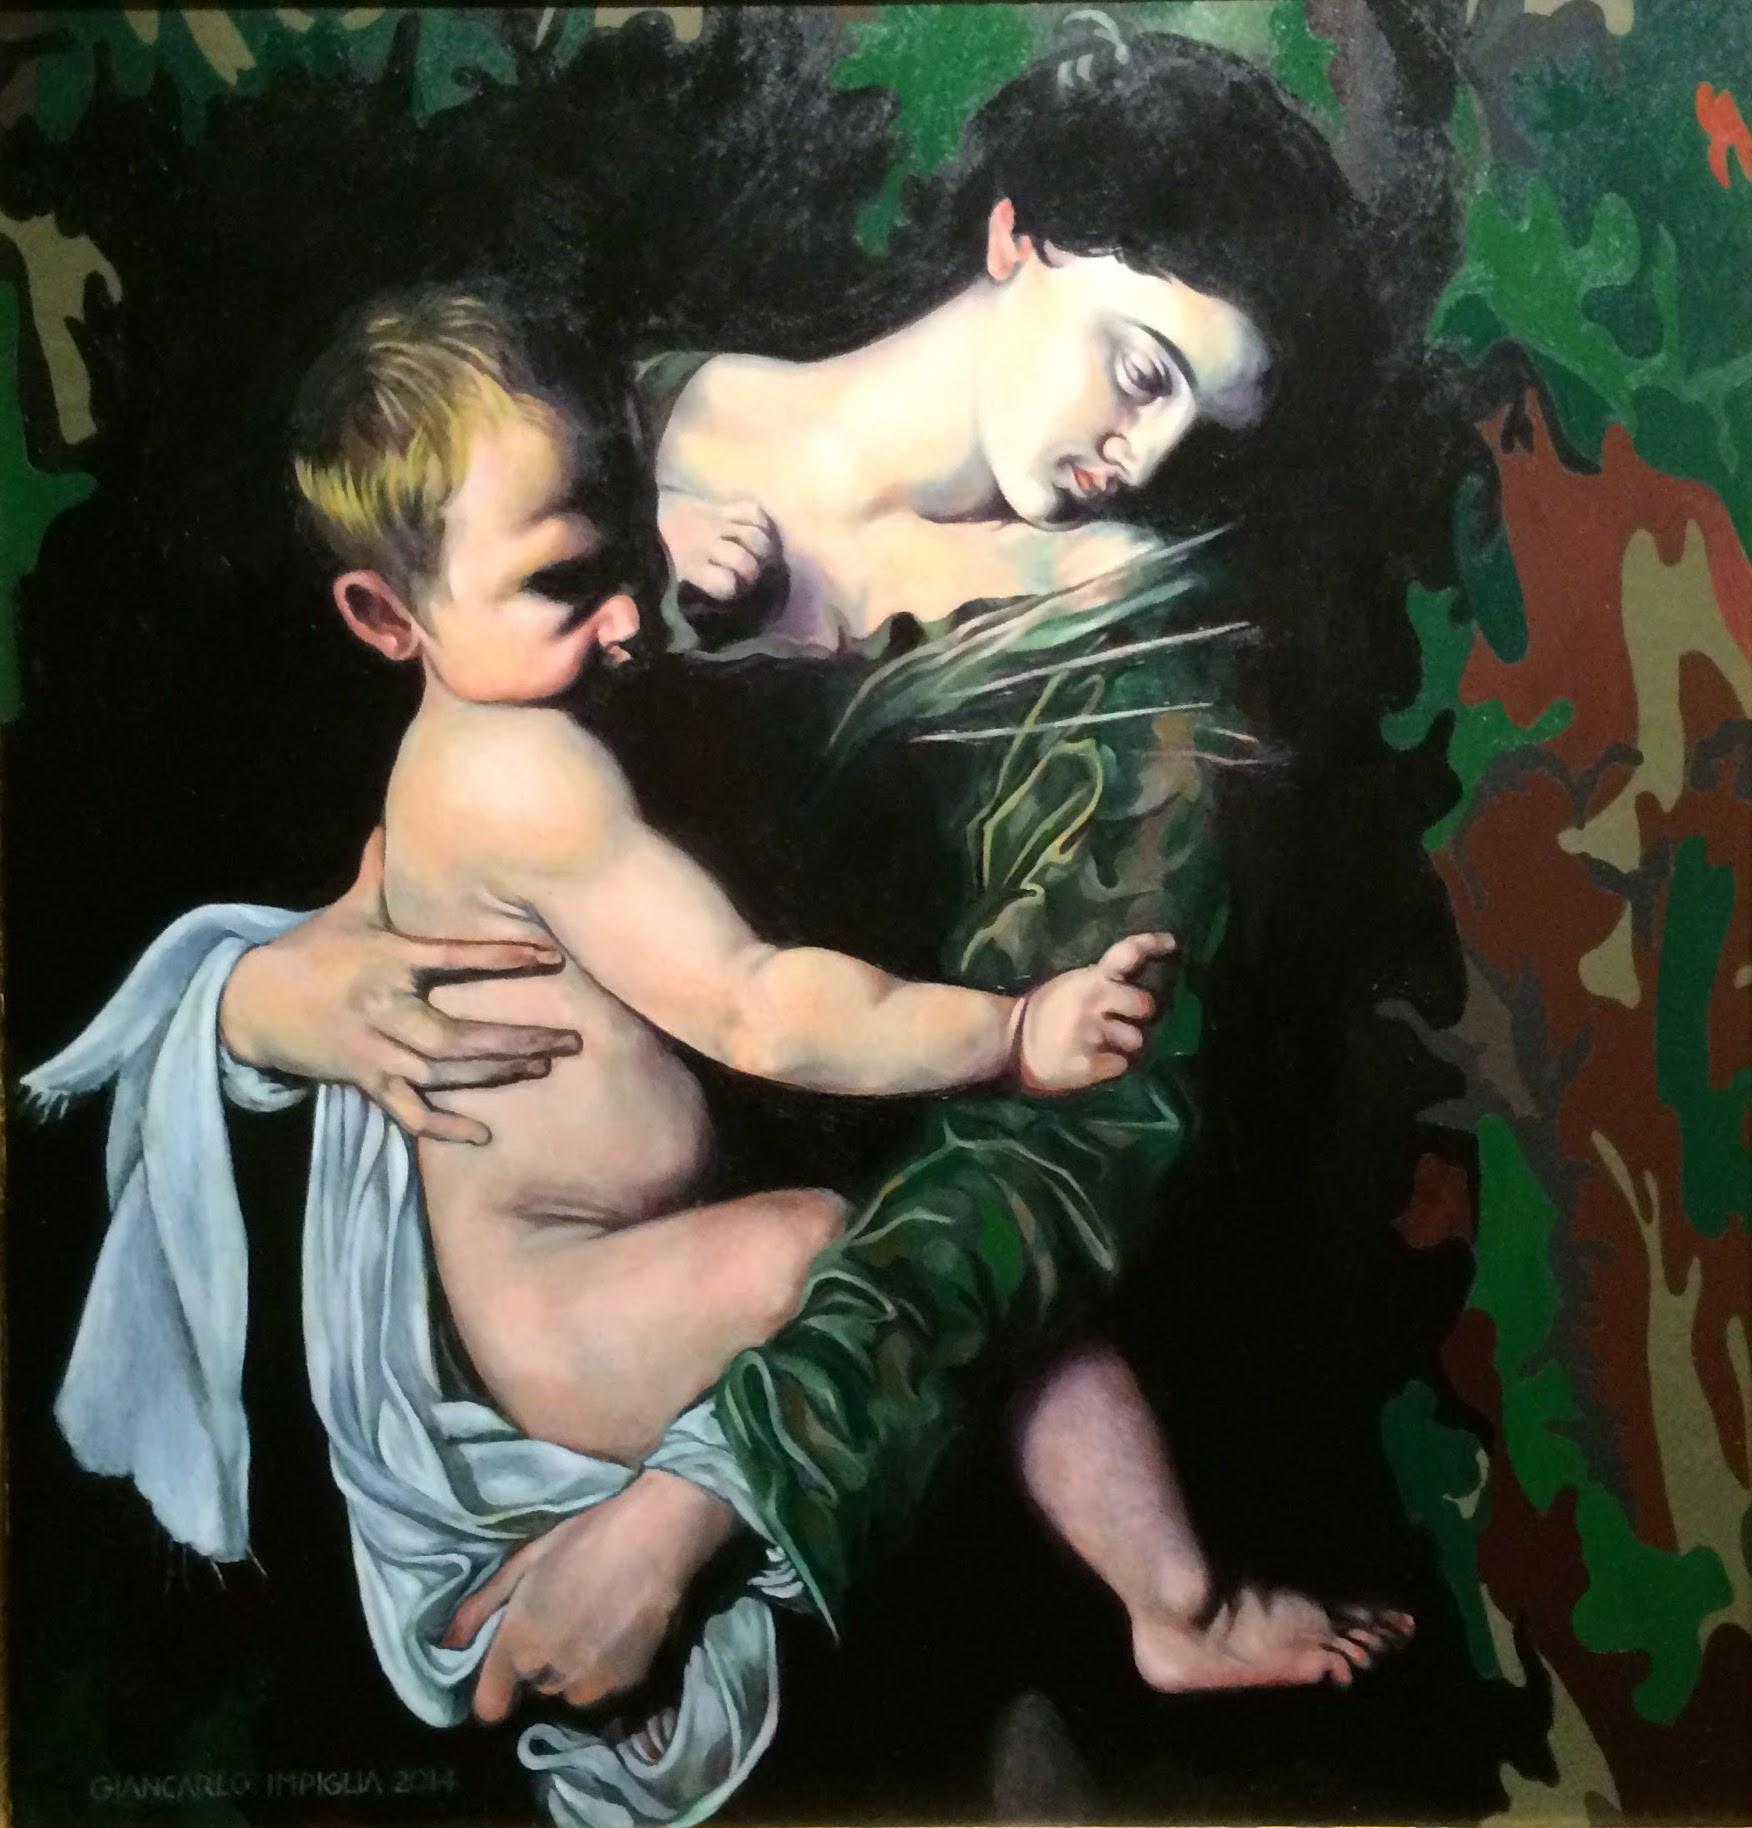 Giancarlo Impiglia Figurative Painting - Mother and Child (After Caravaggio)